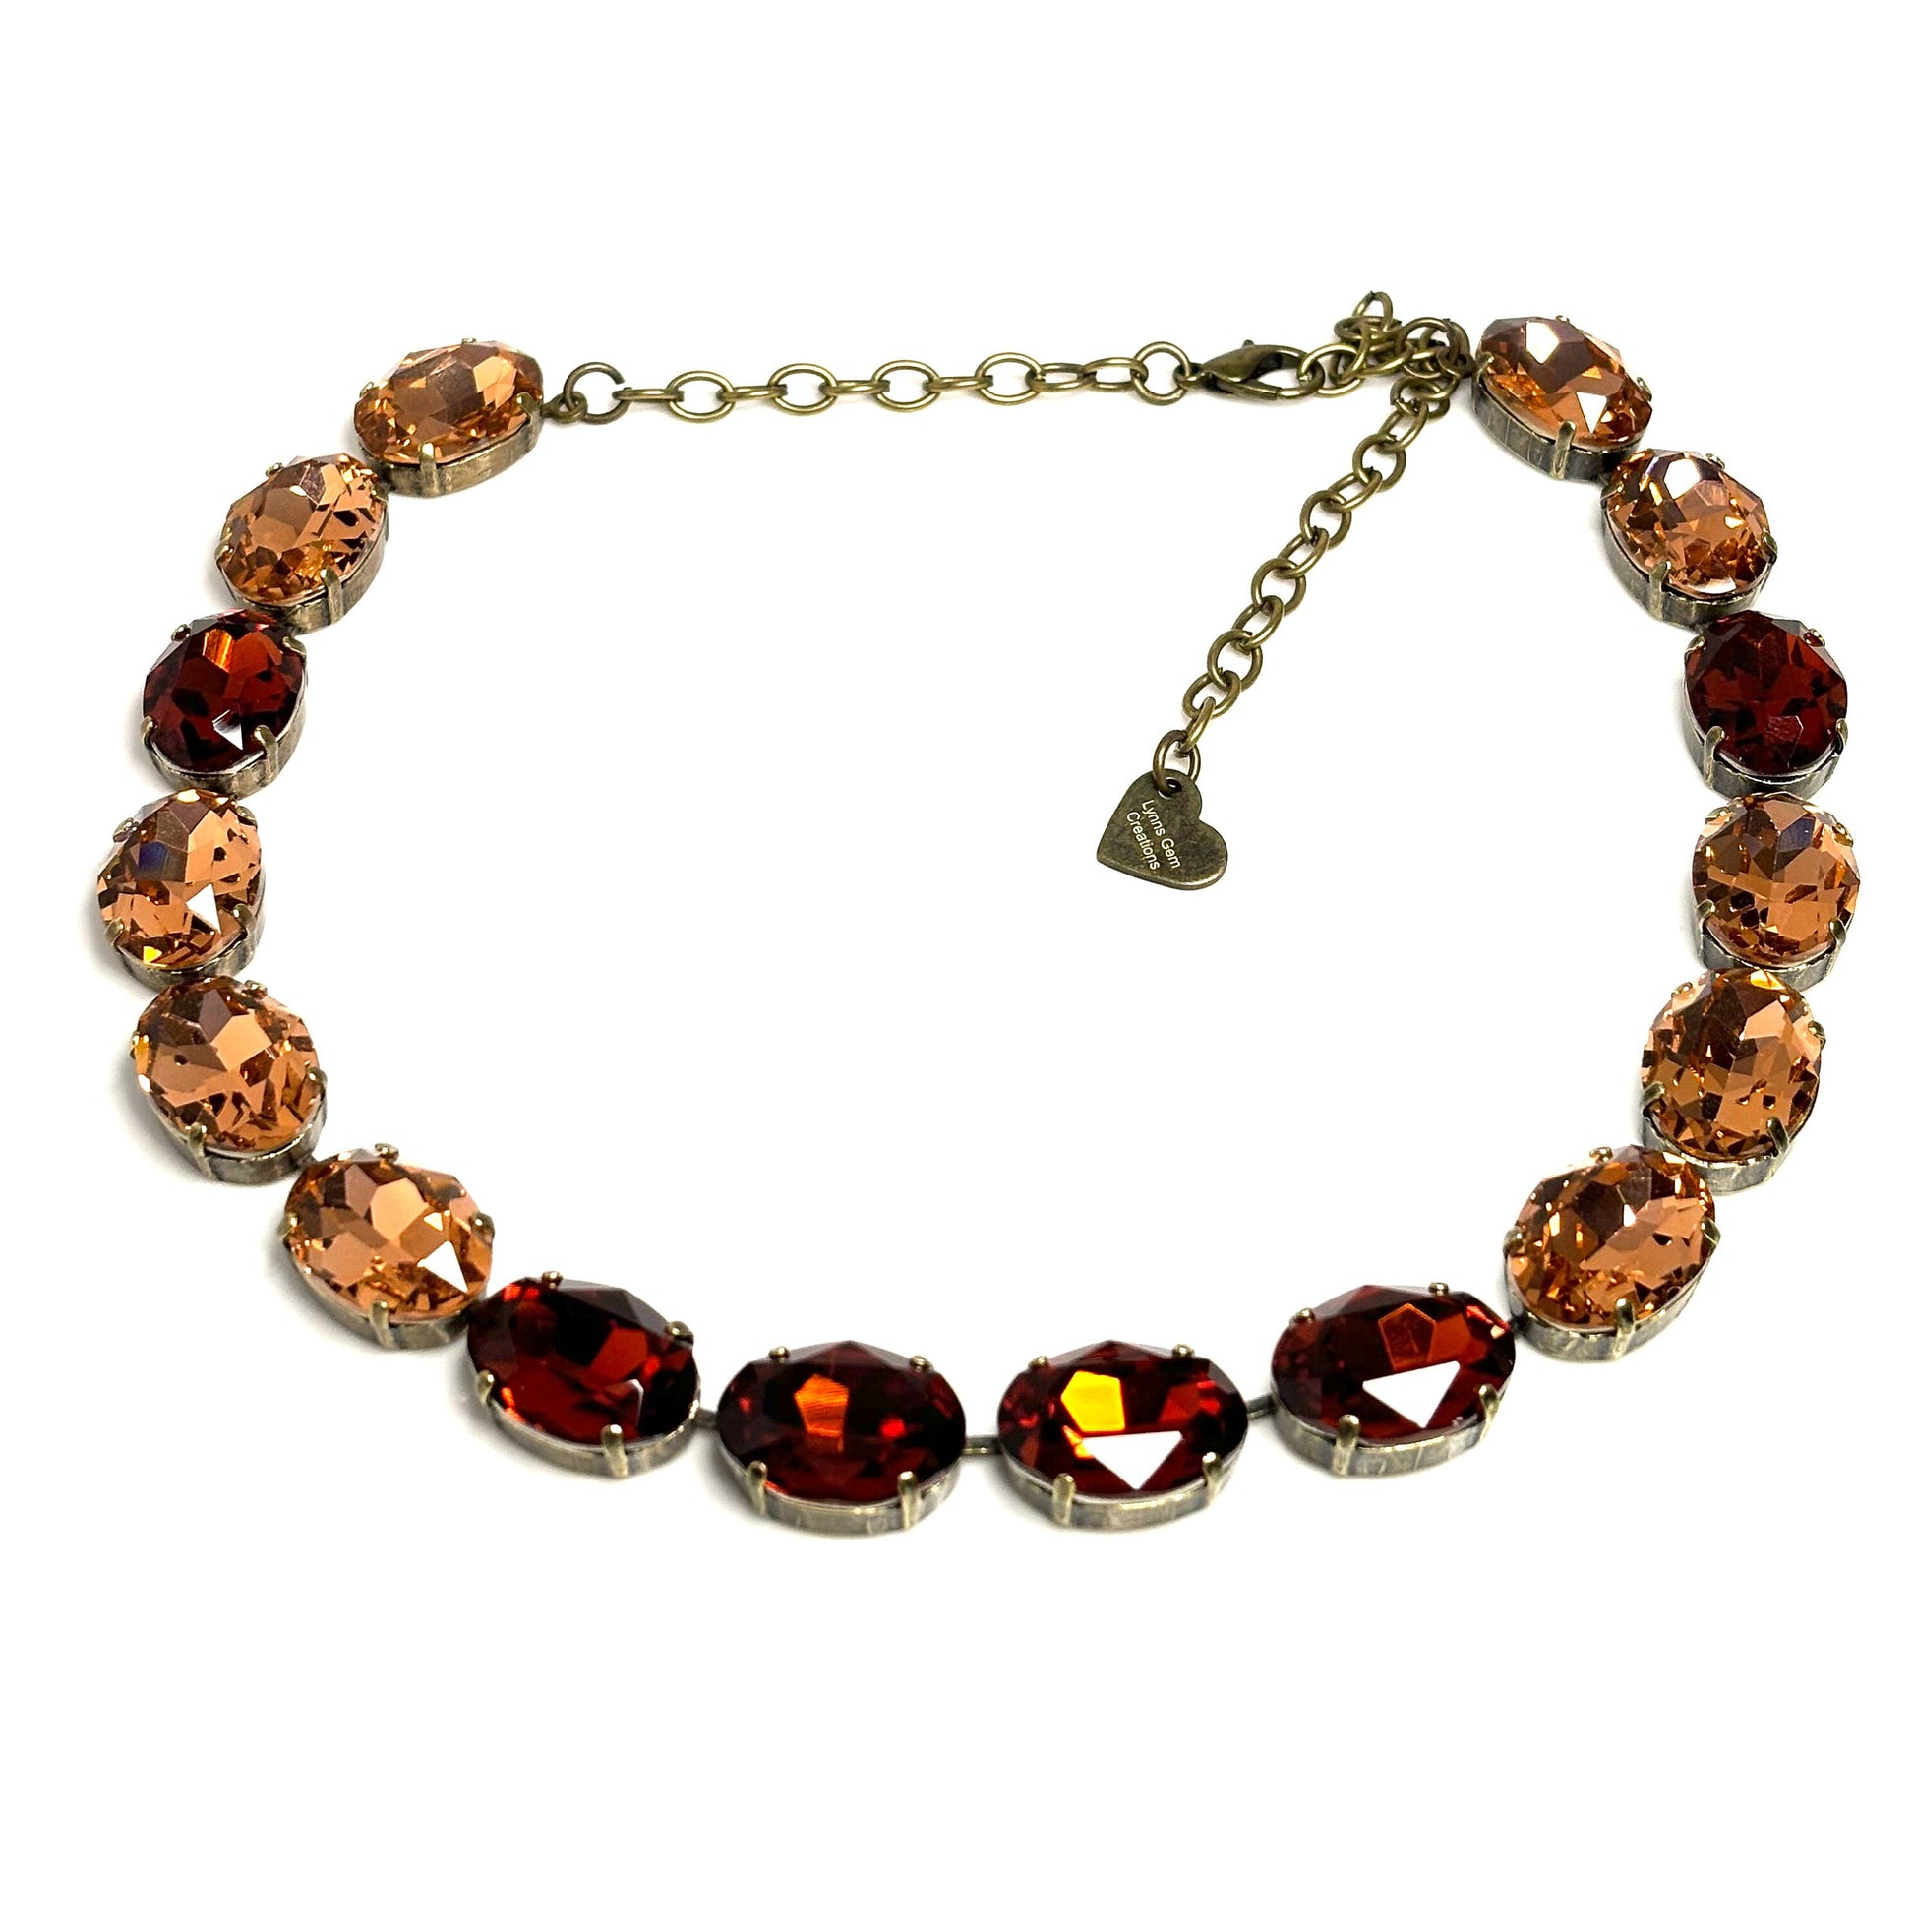 Smoked Topaz Crystal Georgian Collet Necklaces, Anna Wintour Style, Austrian Crystal, Riviere Necklace, Statement Necklaces for Women